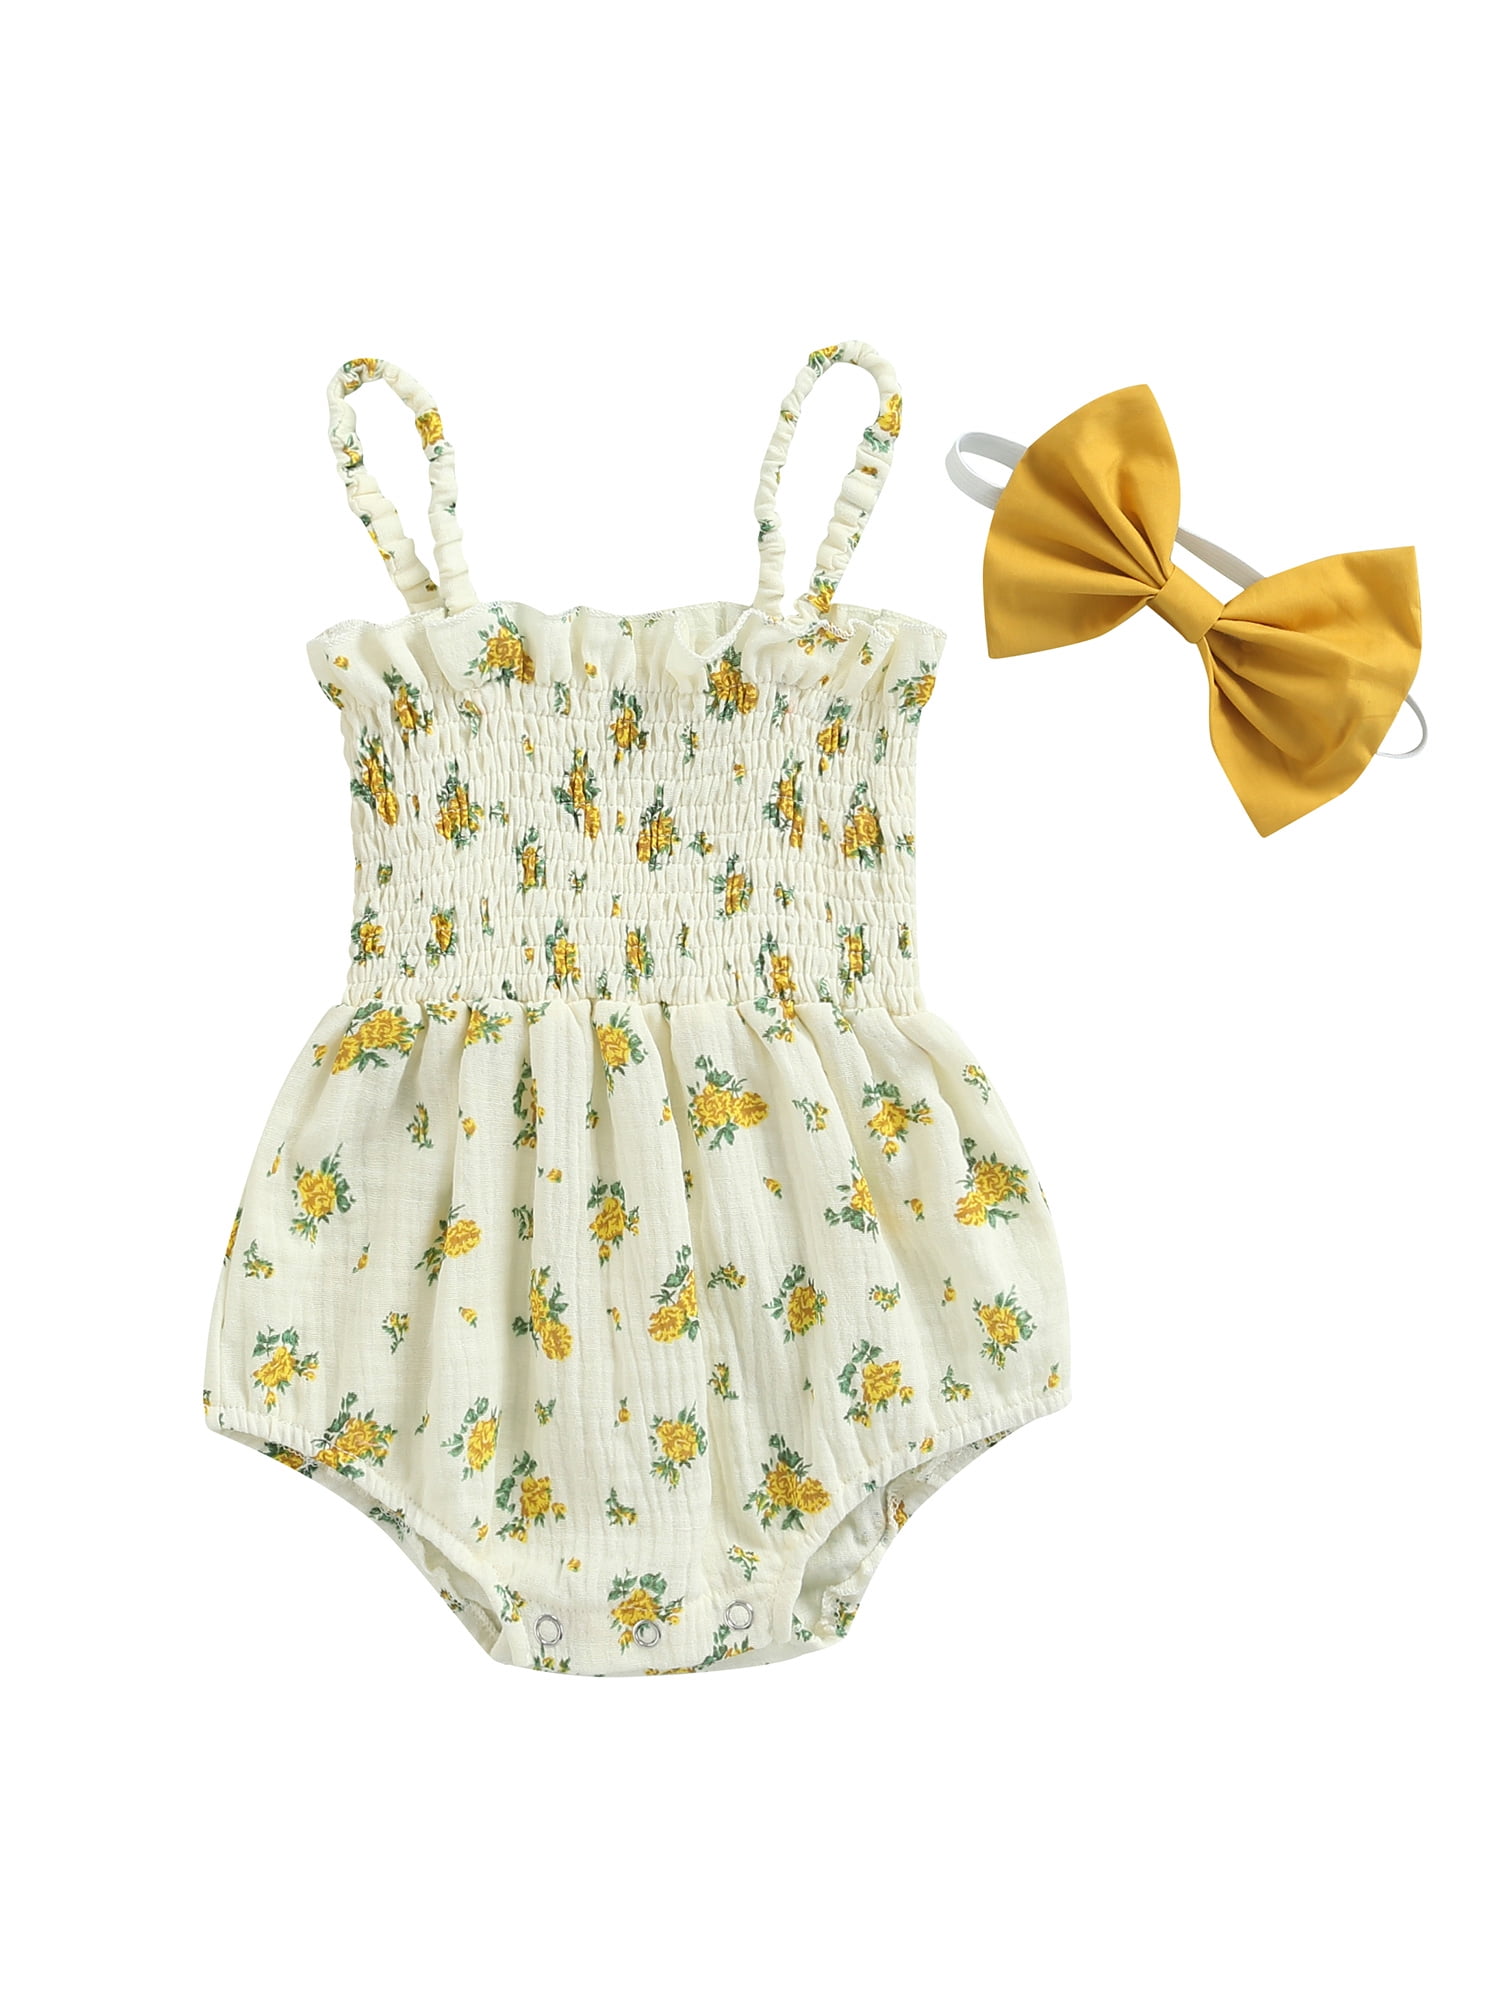 ❤️ Mealeaf ❤️ Infant Baby Girls Sleeveless Floral Print Jumpsuit Romper Outfits Clothes（3-24M） 